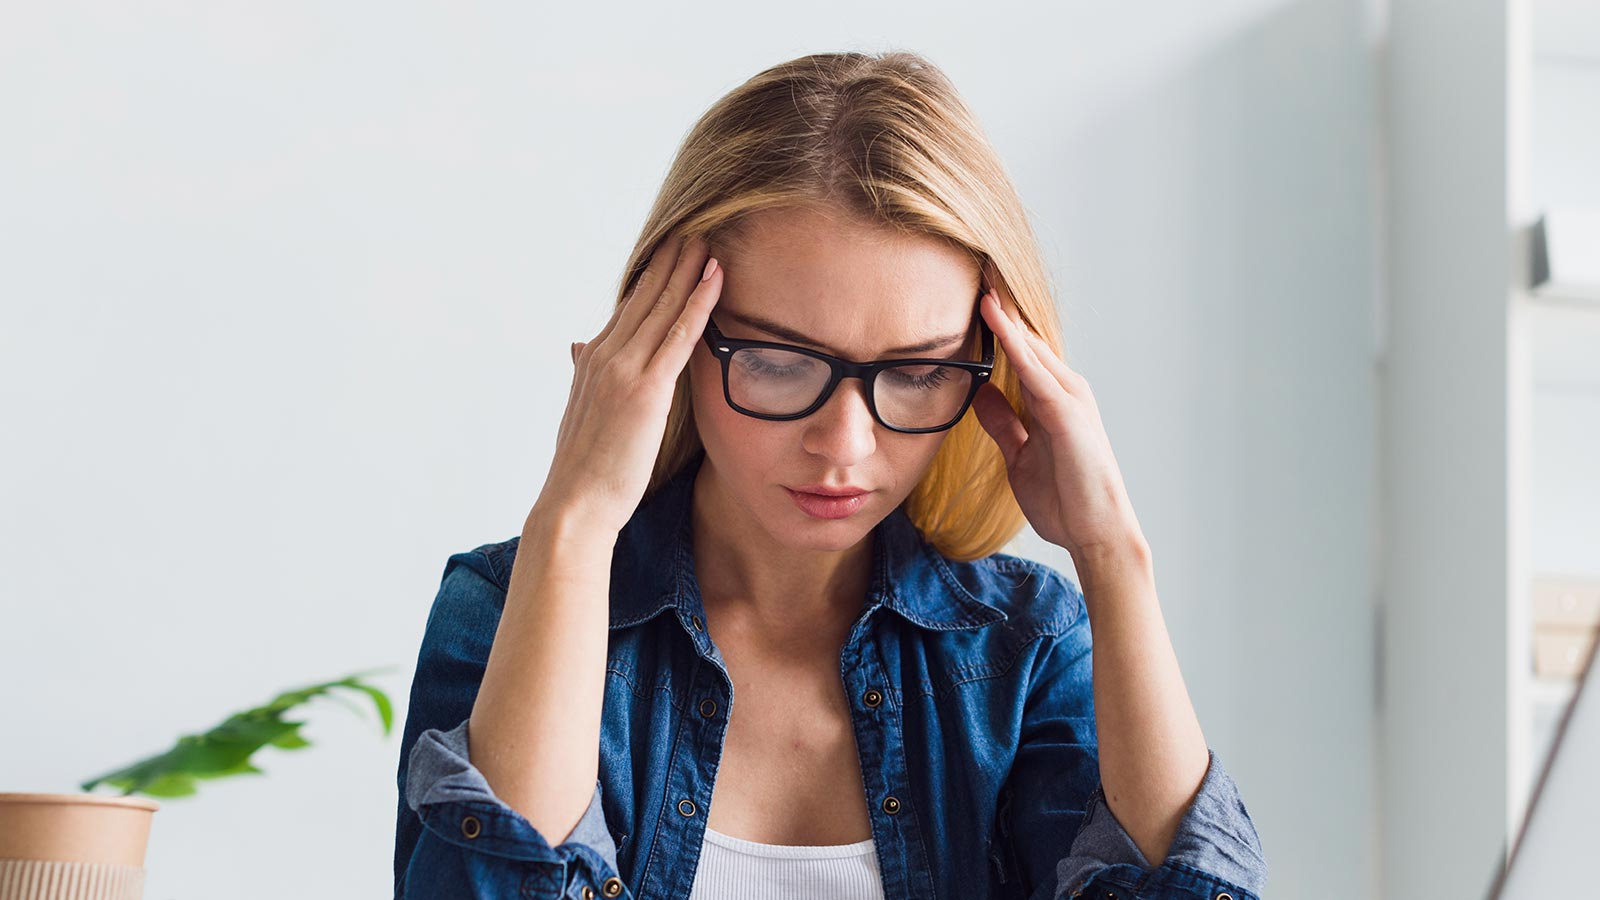 headache is a major side effects of adjusting to new eyeglasses